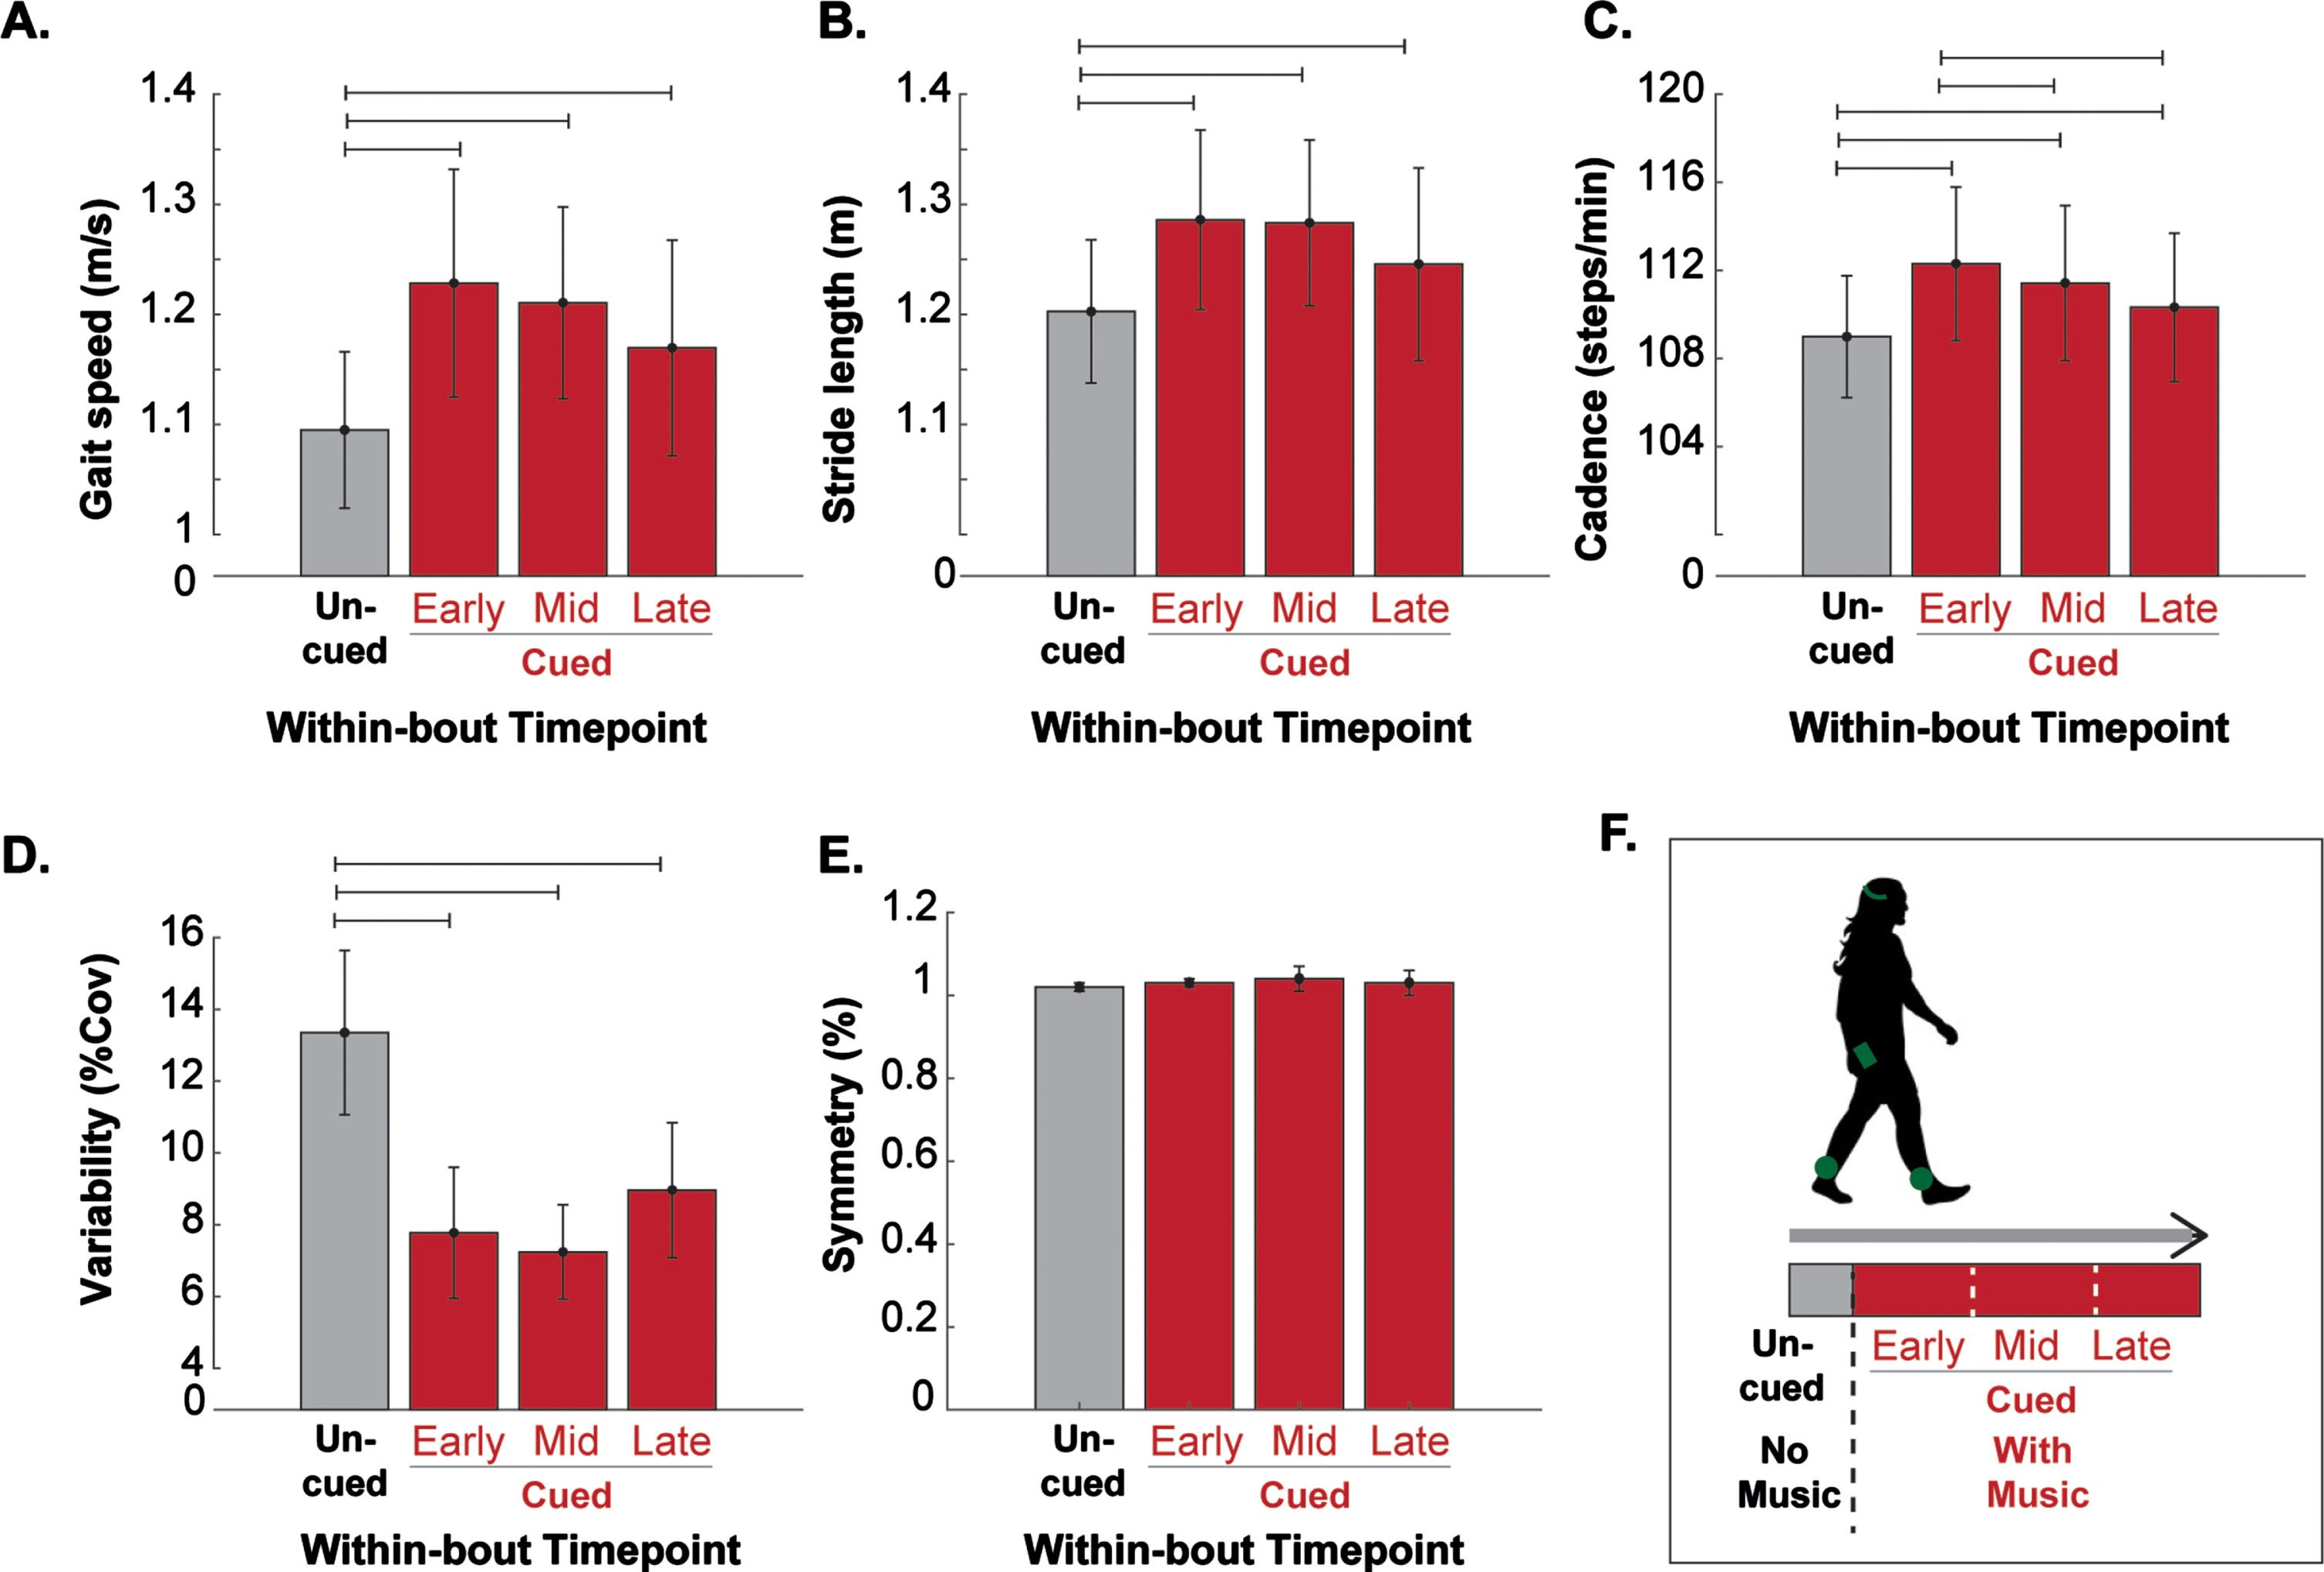 Within-session effects of MR-005 on gait quality